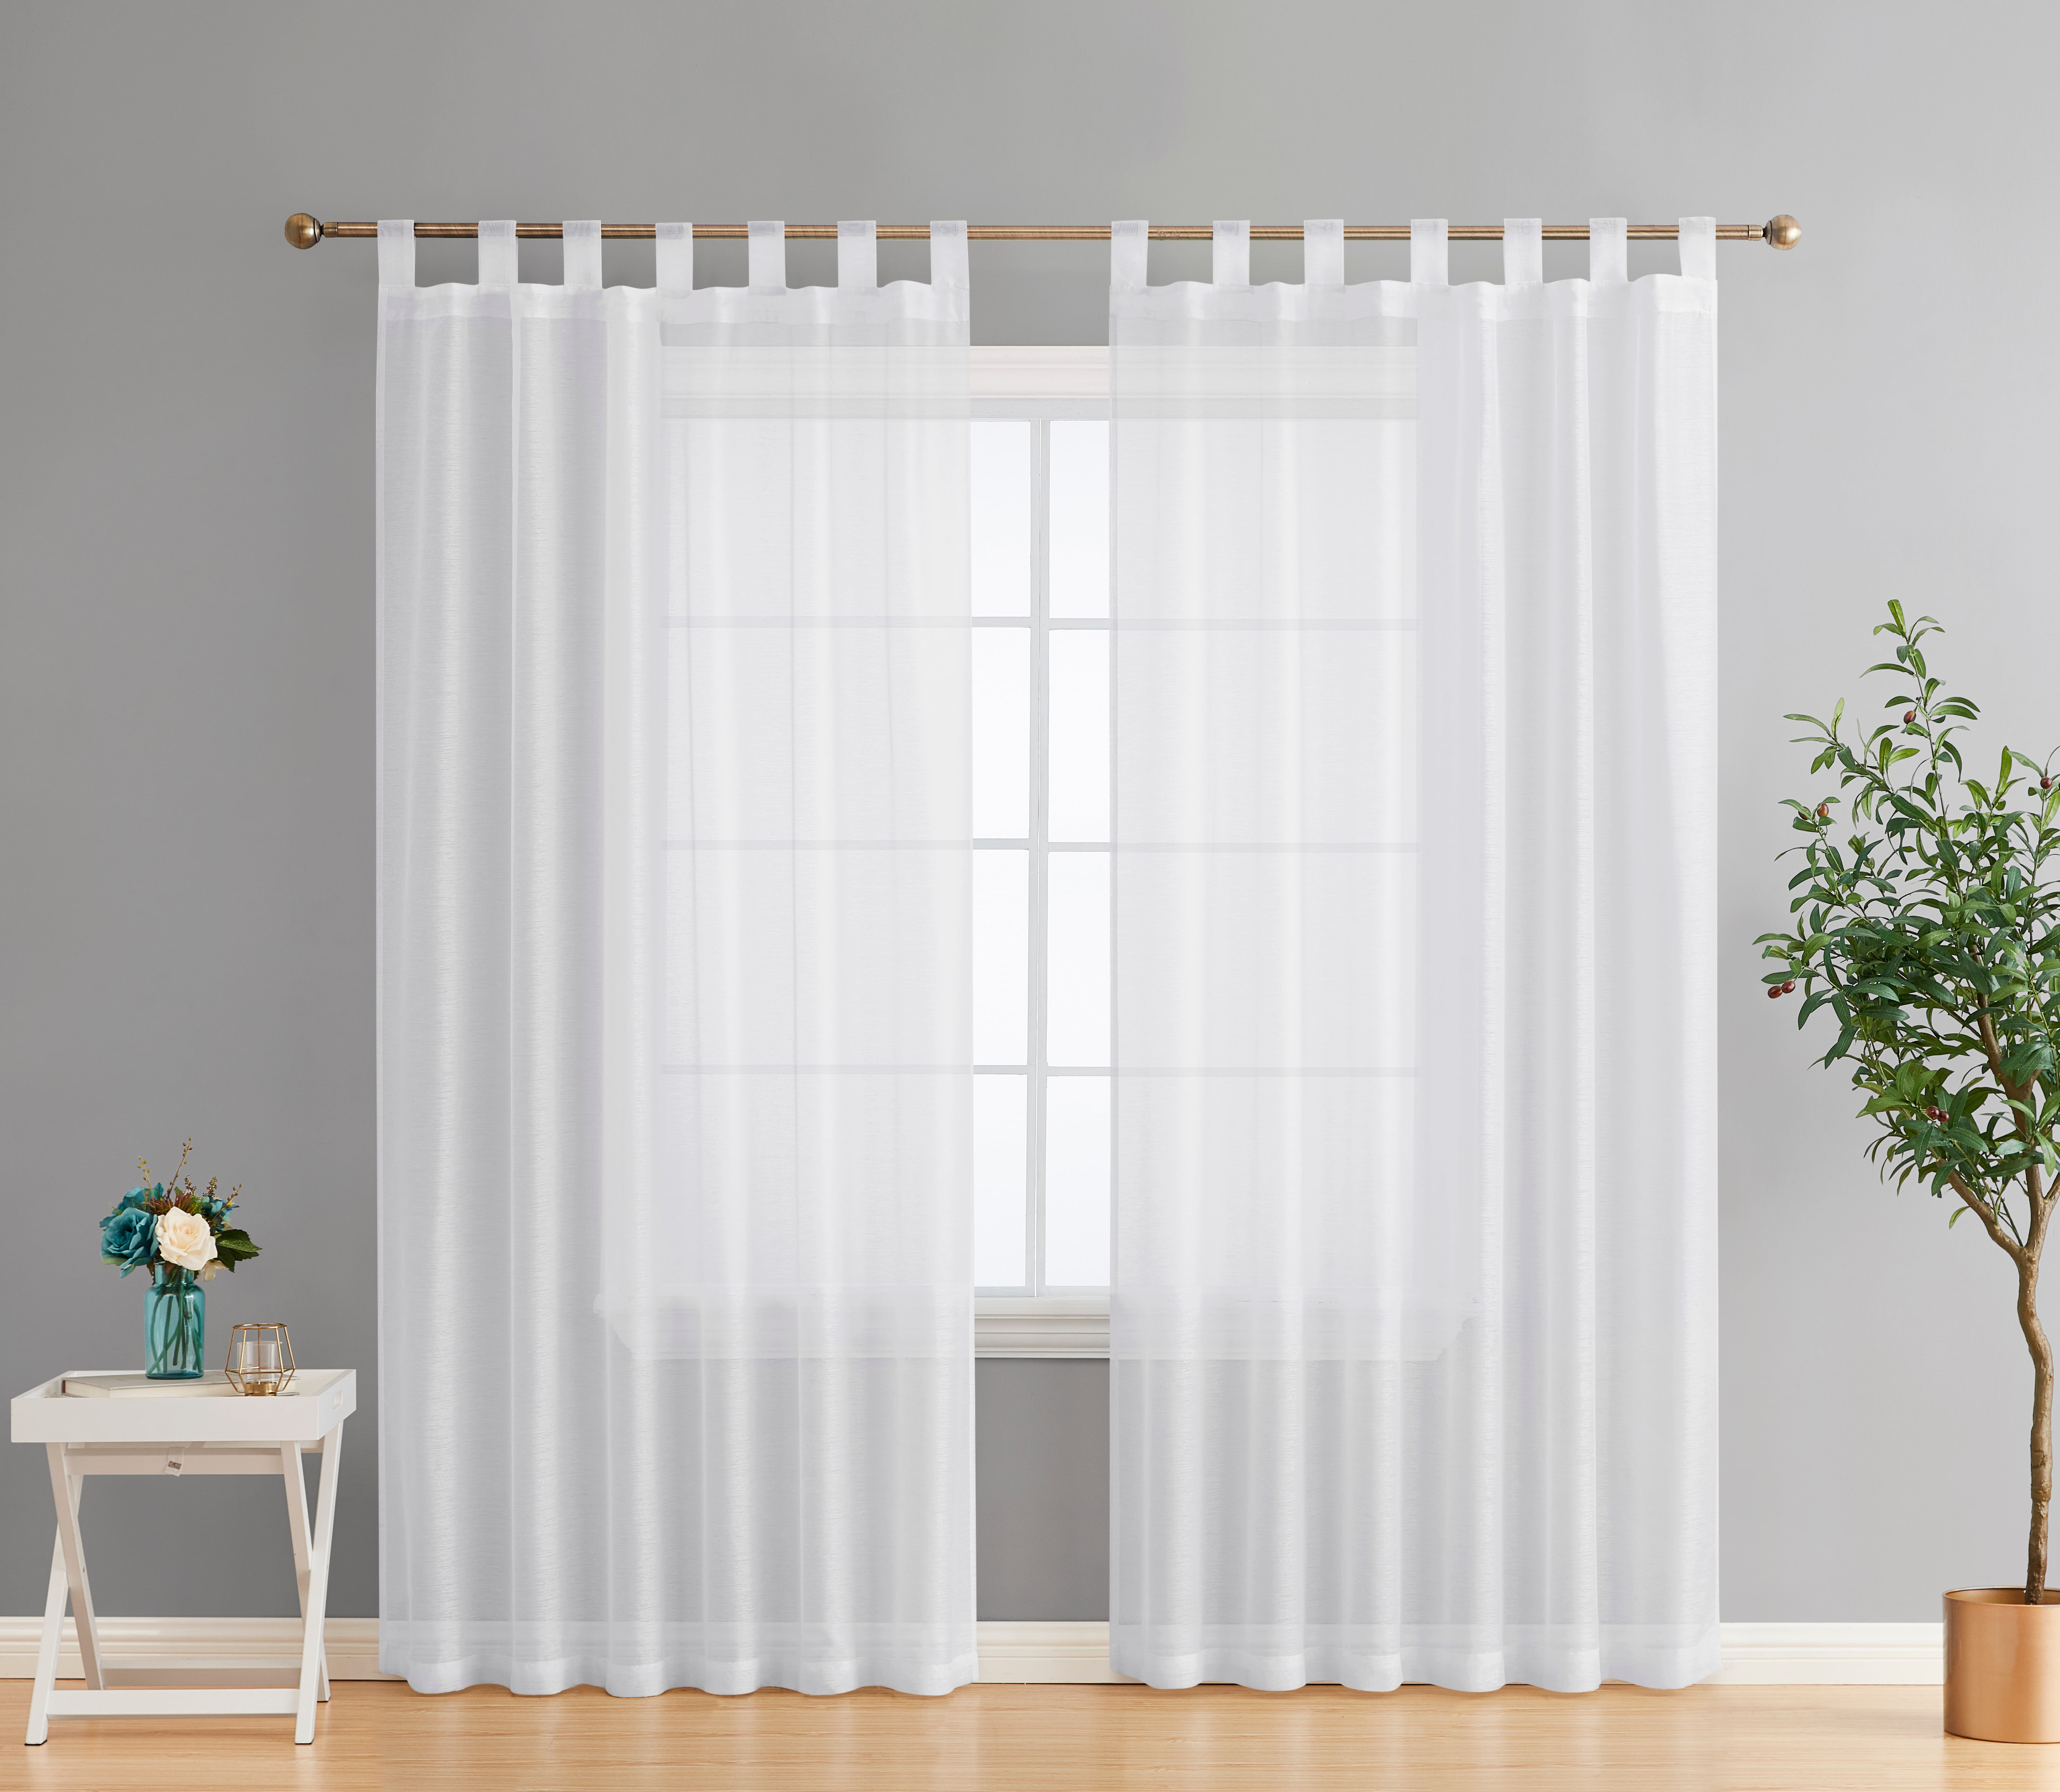 2PC VOILLE SHEER STRAIGHT VALANCE SMALL WINDOW CURTAIN SHORTH PANEL 2 STYLE NEW 